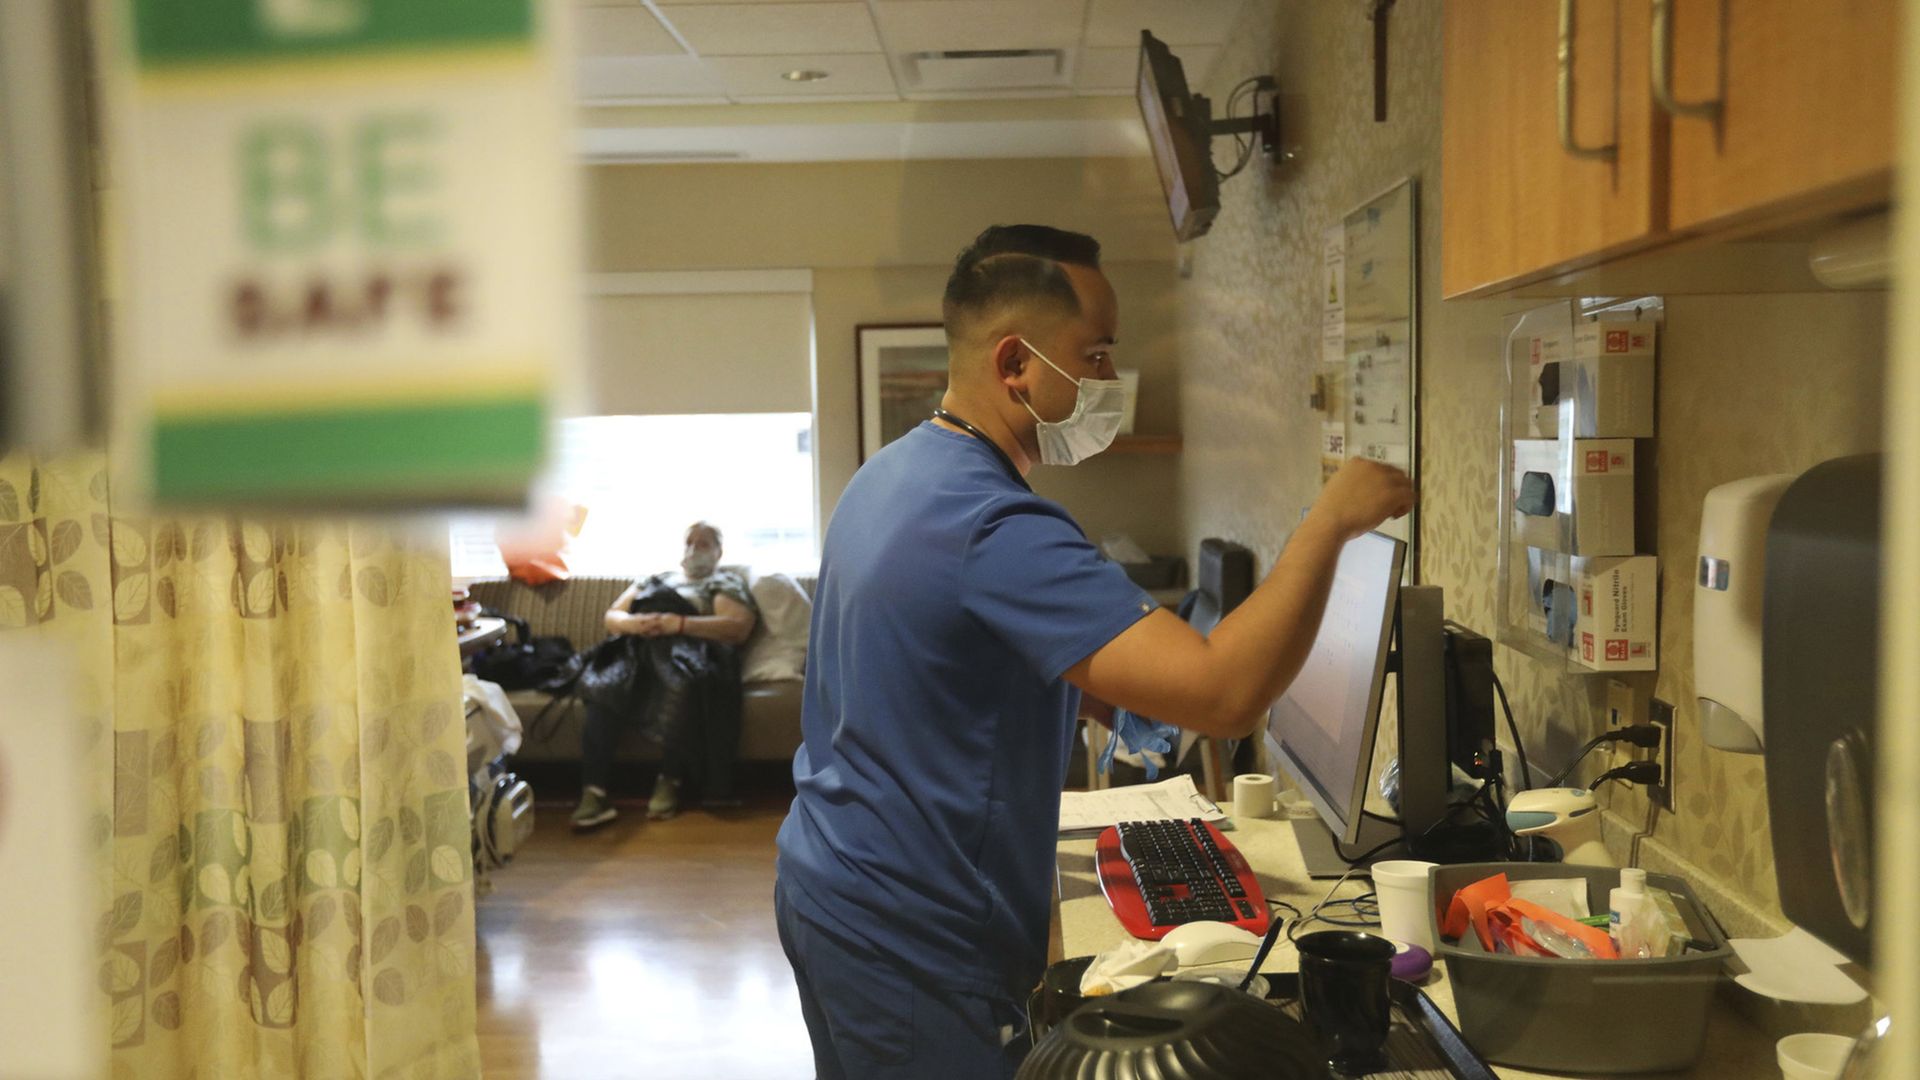 Registered nurse Paolo Salvallon wears his face mask as he checks in on a patient at Loyola University Medical Center in Maywood, Illinois, Friday, April 22, 2022